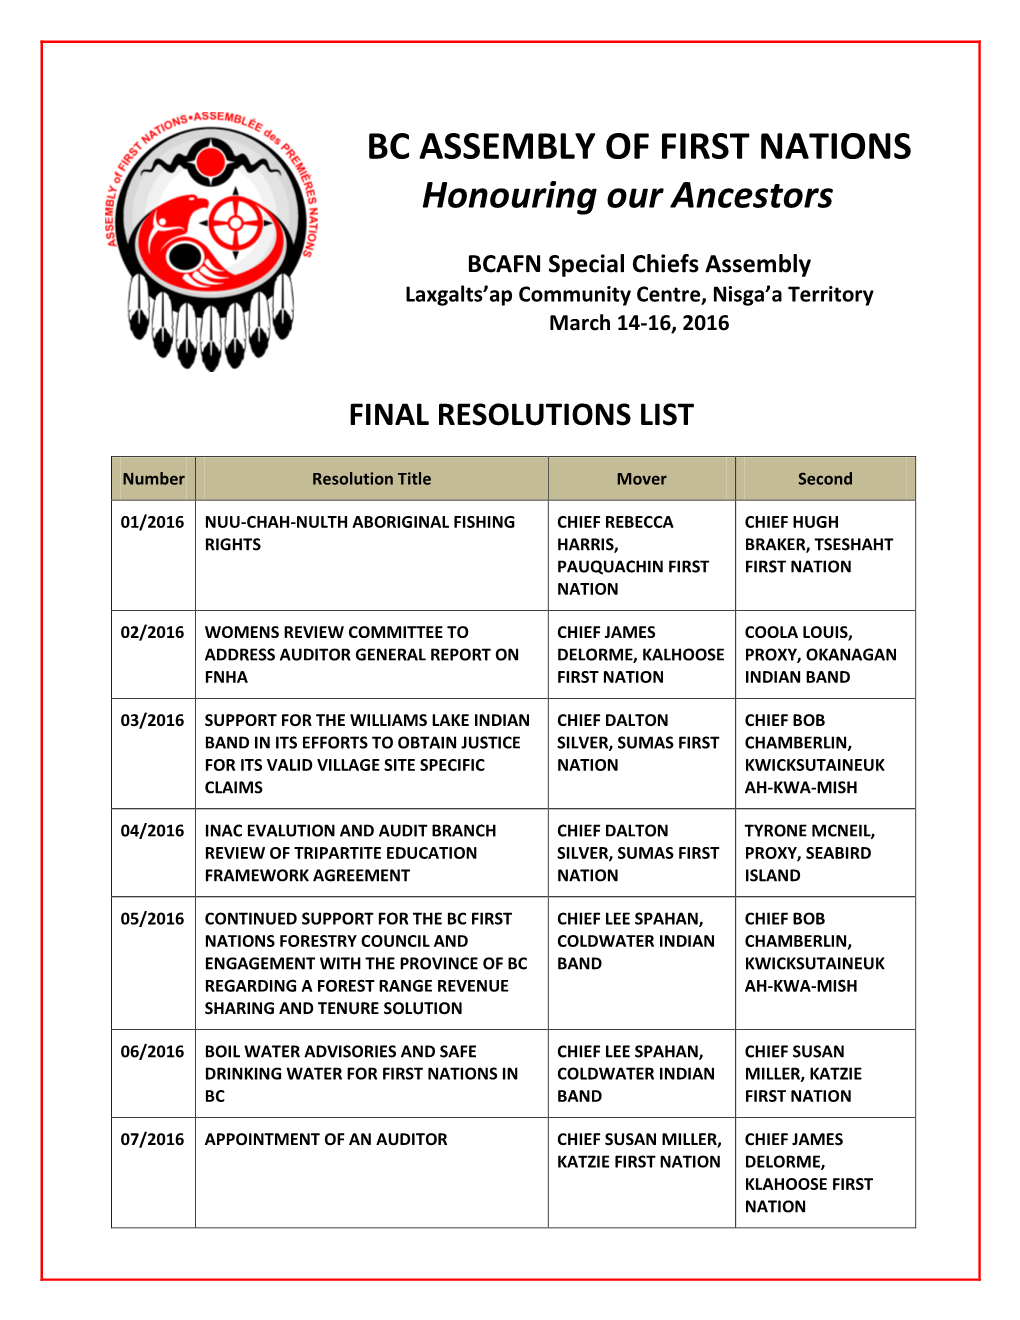 BC ASSEMBLY of FIRST NATIONS Honouring Our Ancestors